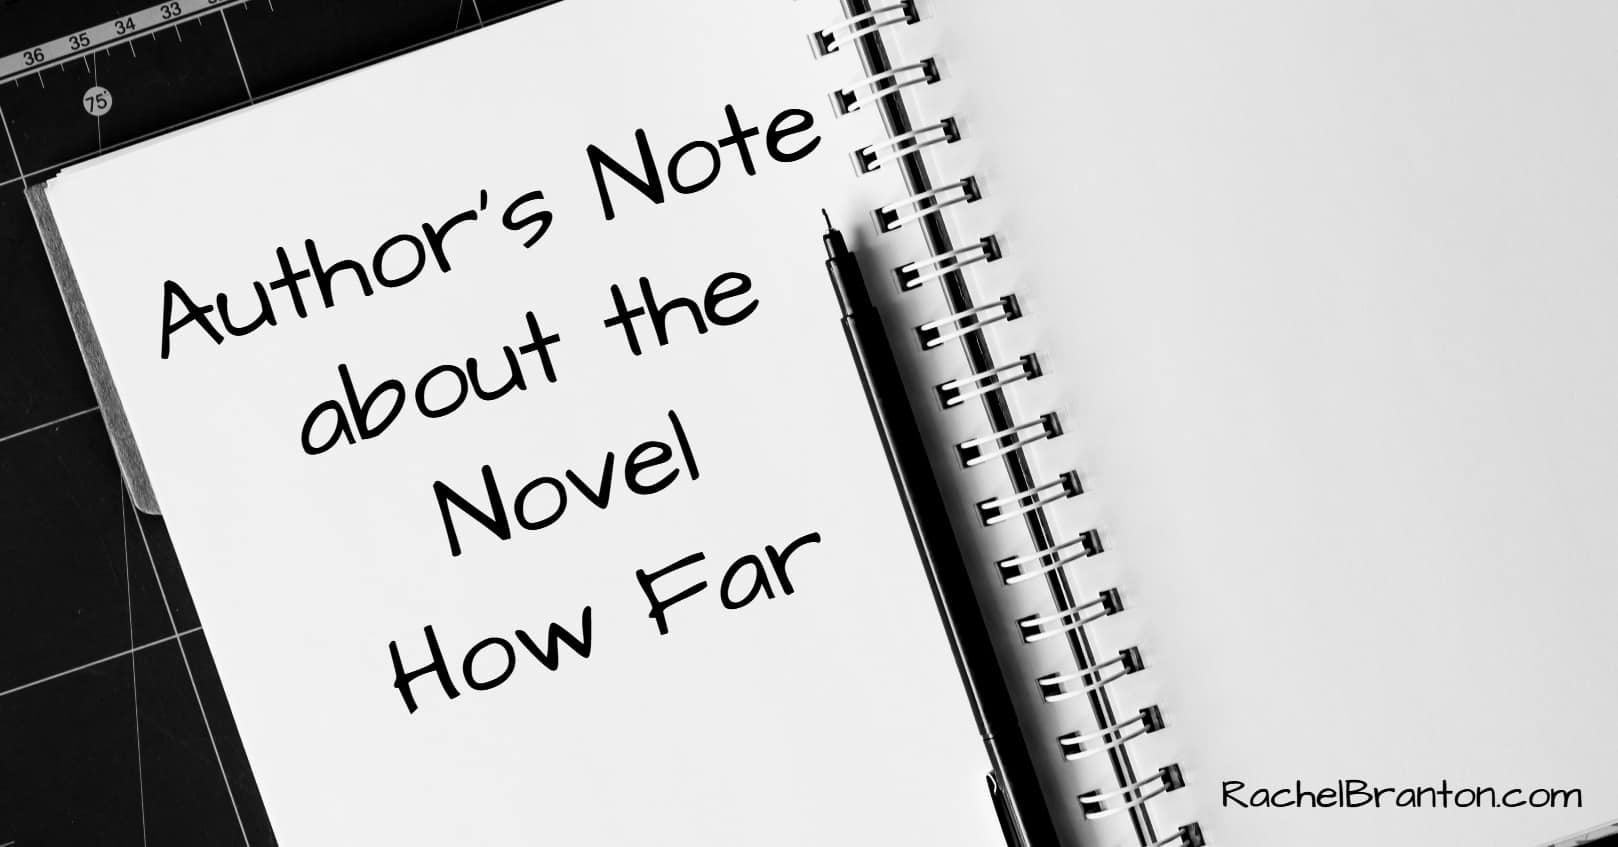 Author's note about the novel How Far